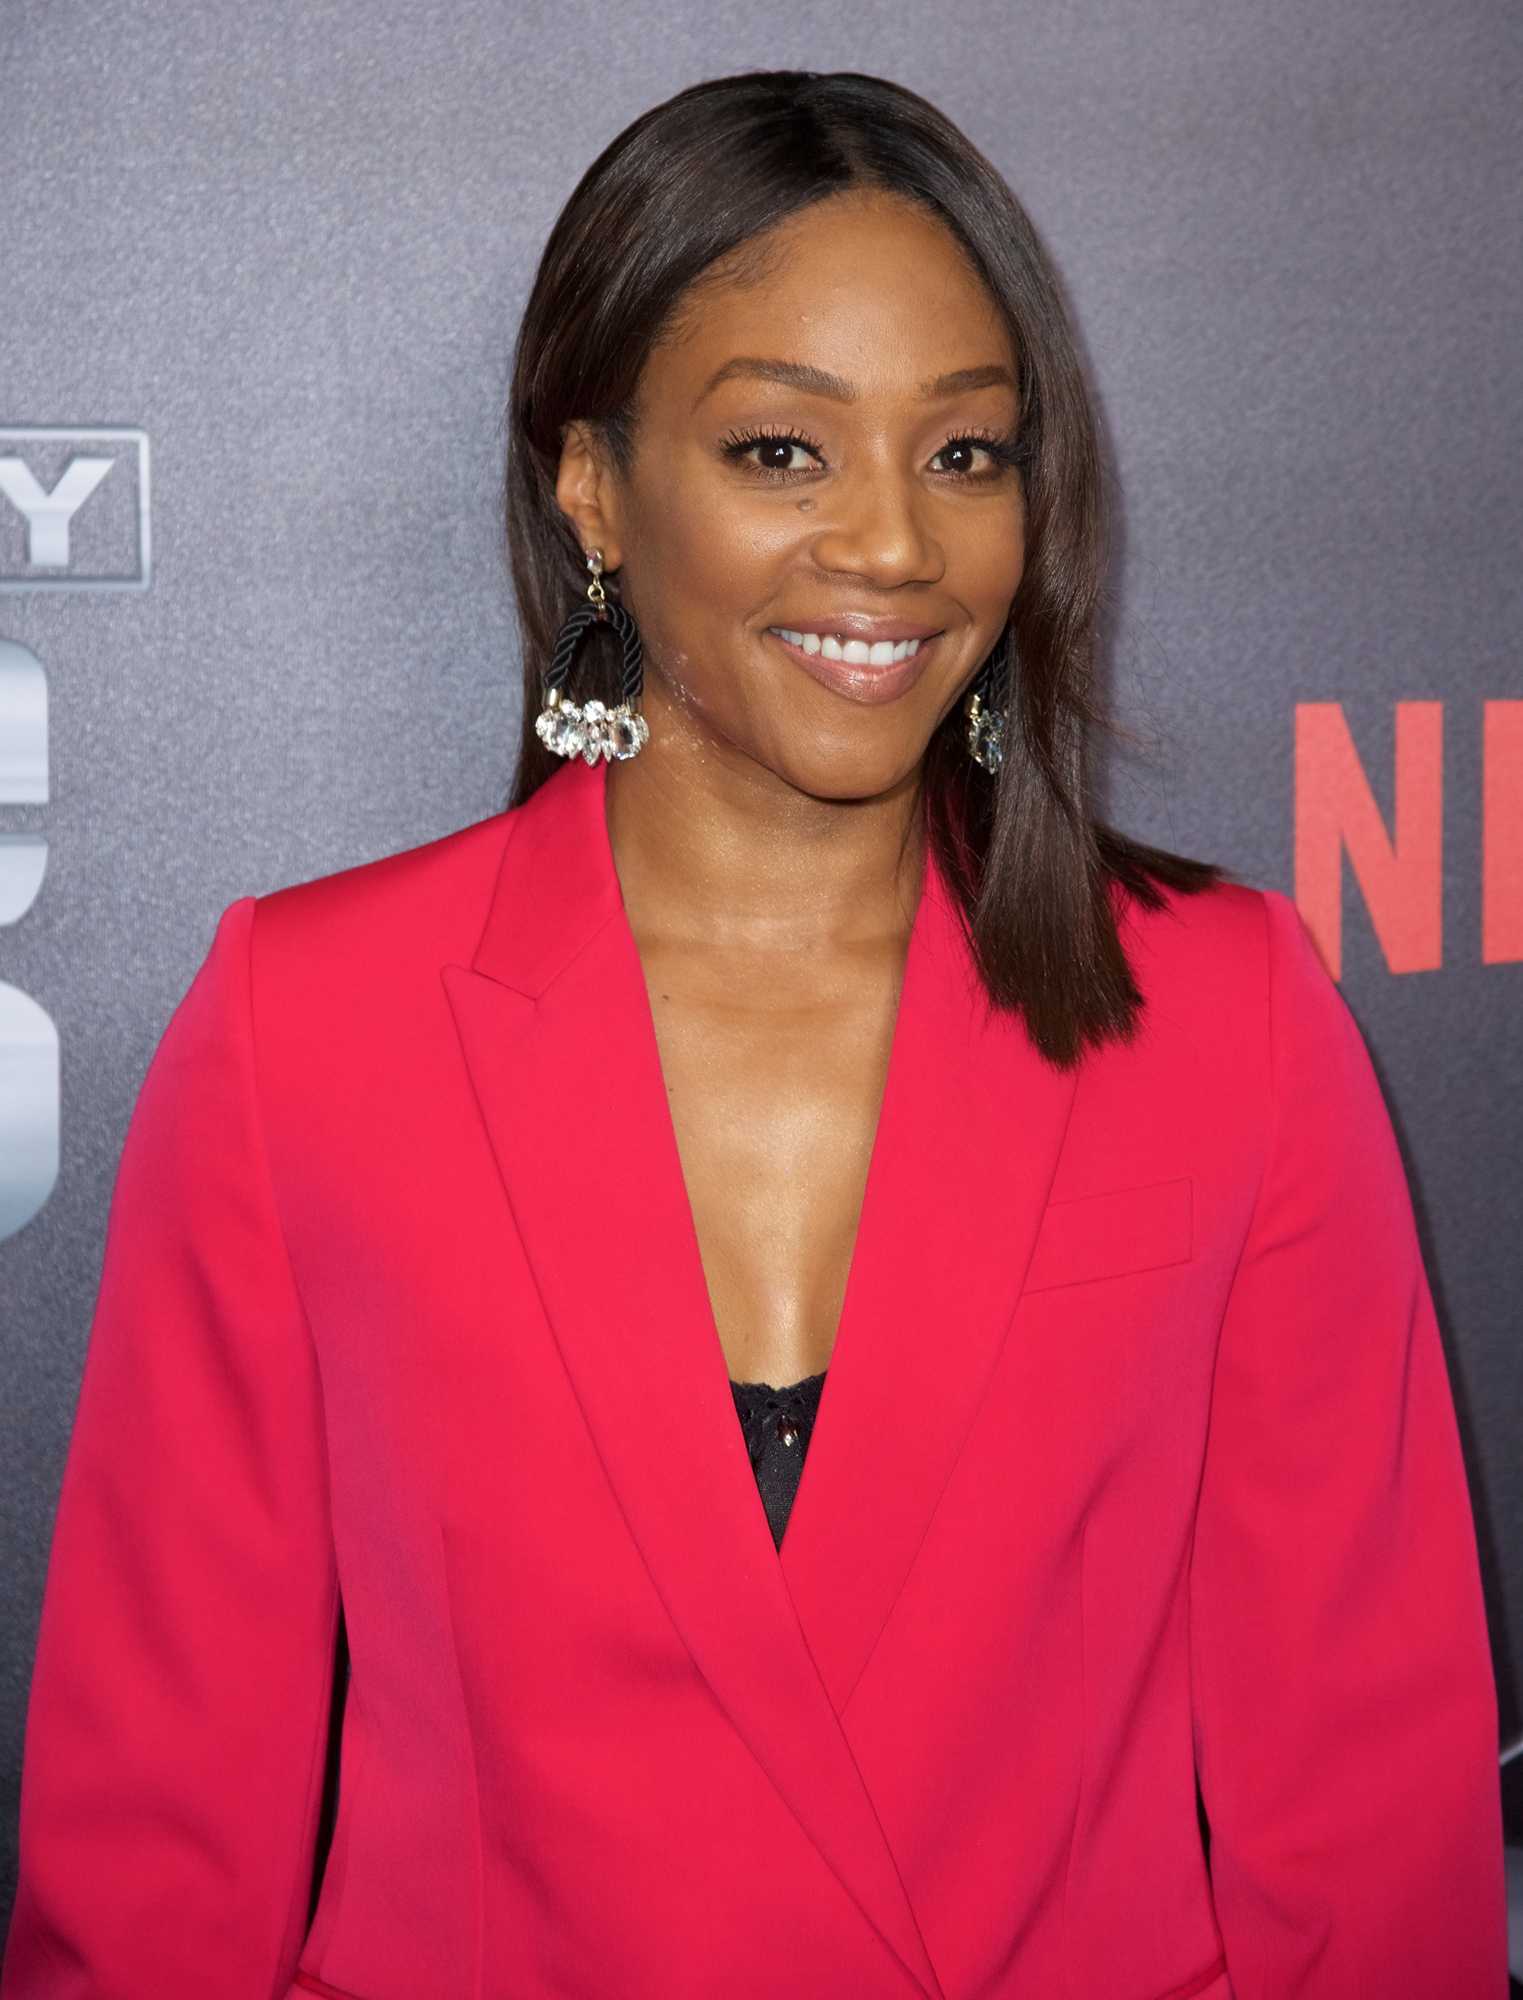 70+ Hot And Sexy Pictures Of Tiffany Haddish Are Just Too Hot To Handle 534